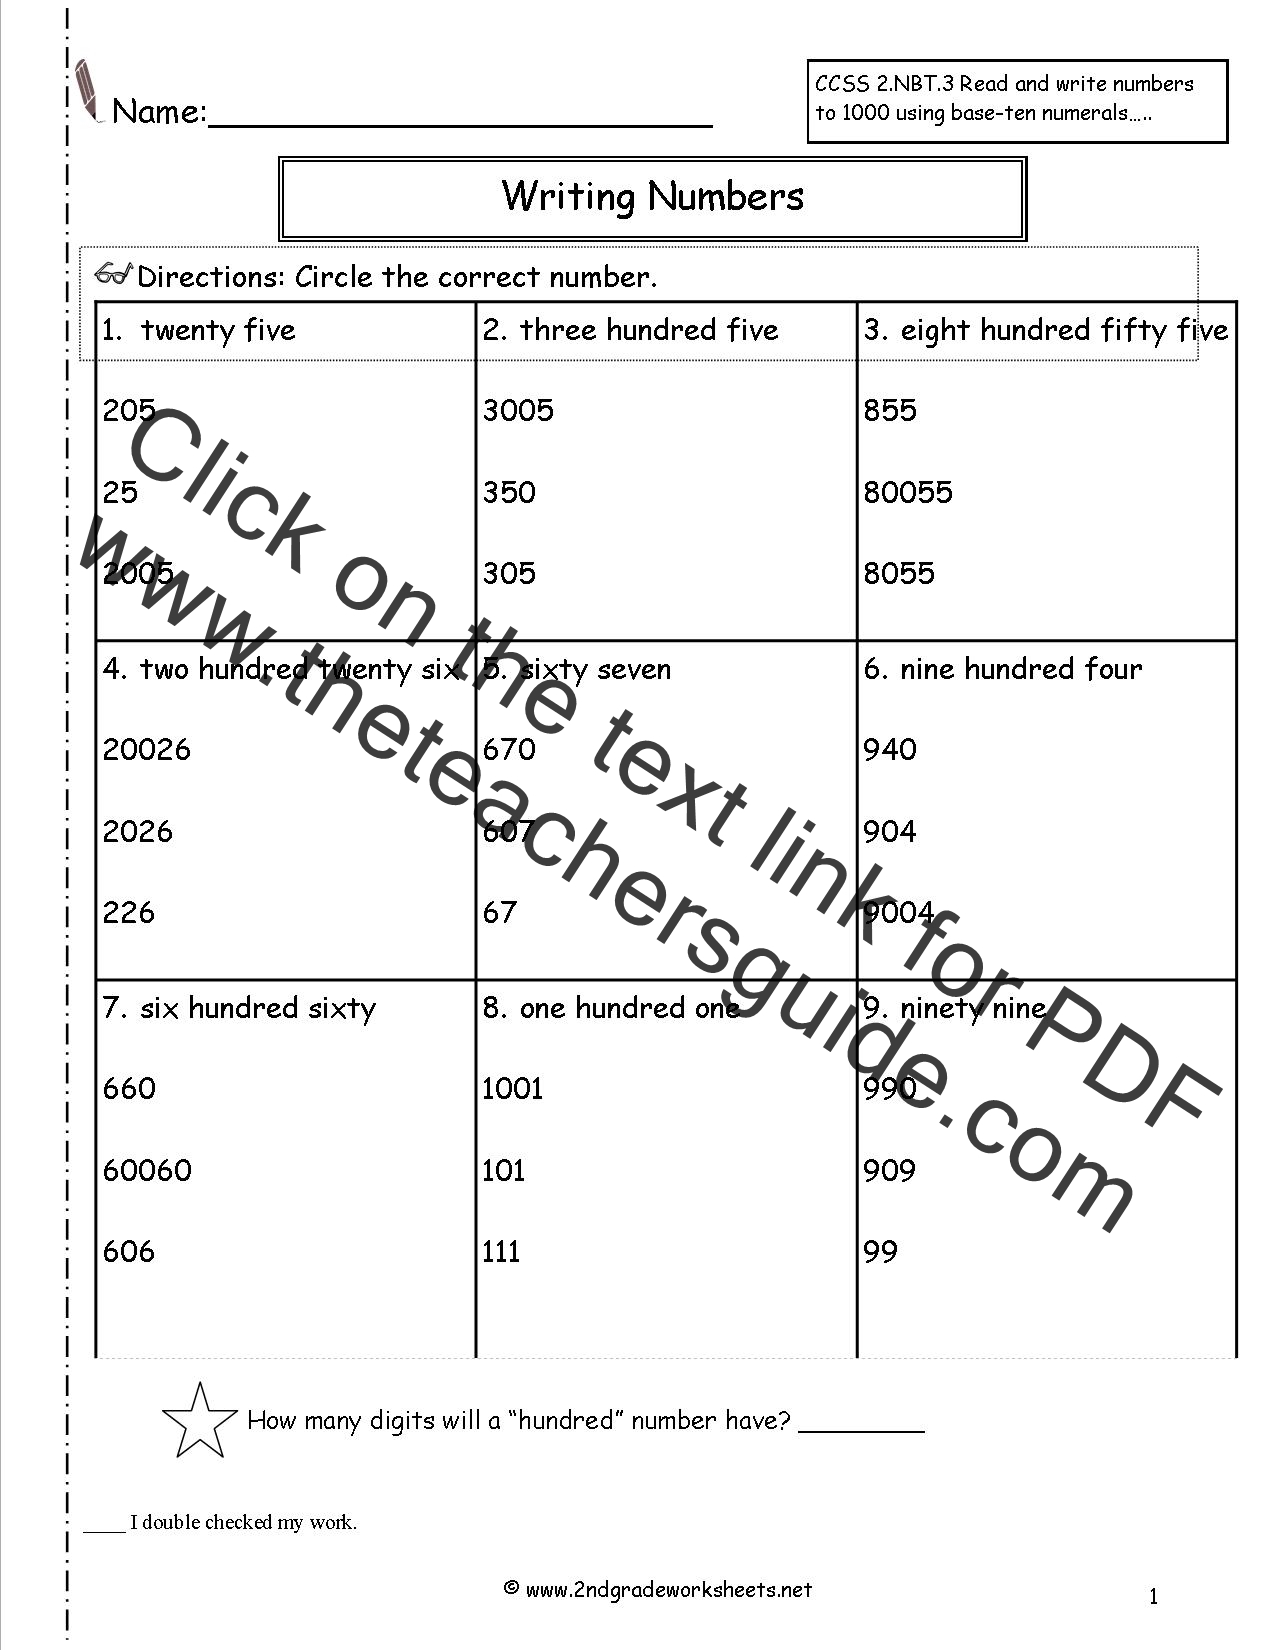 second-grade-reading-and-writing-numbers-to-1000-worksheets